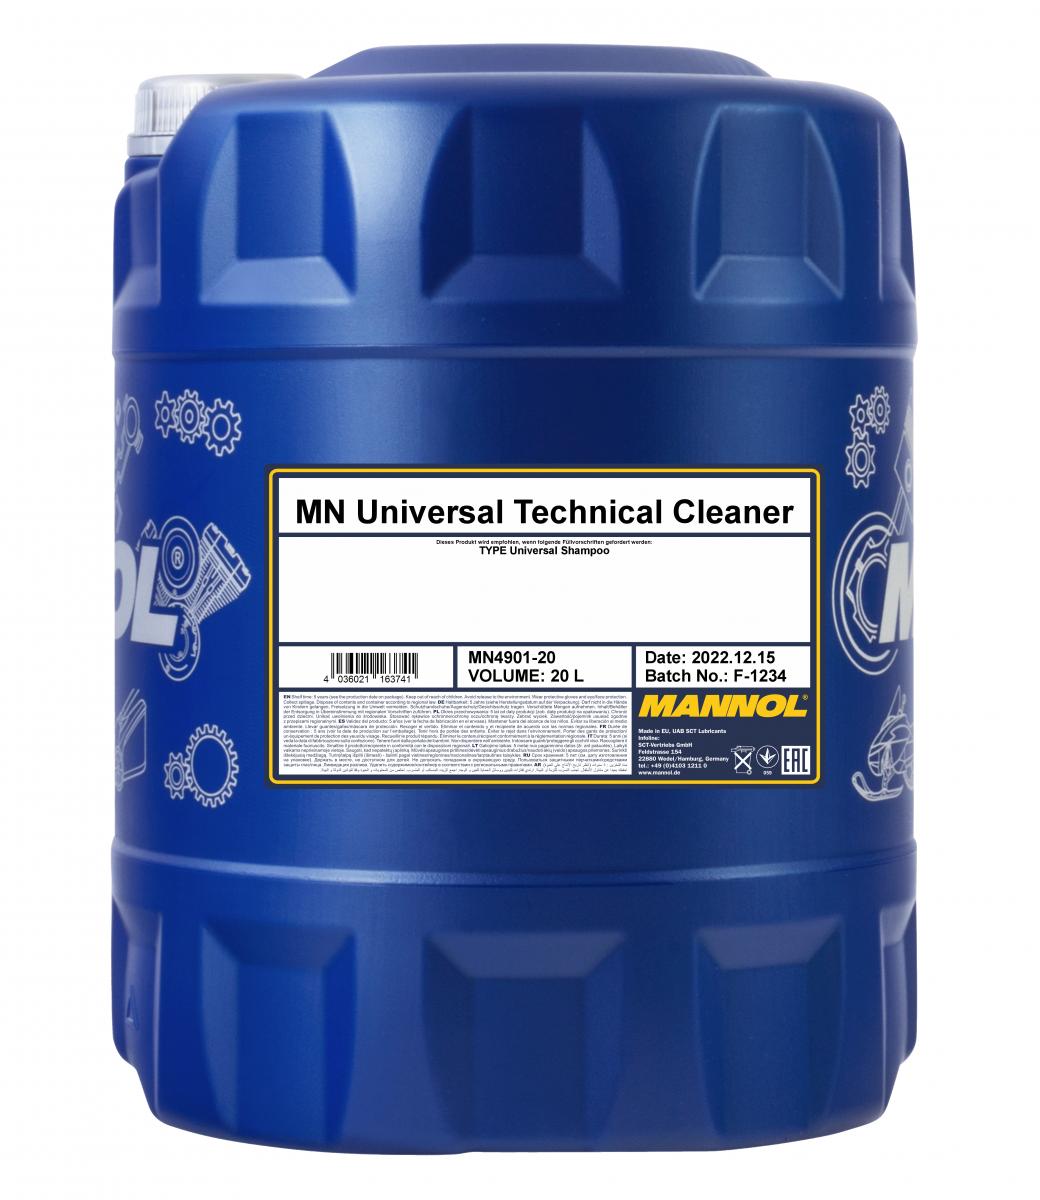 MN Universal Technical Cleaner